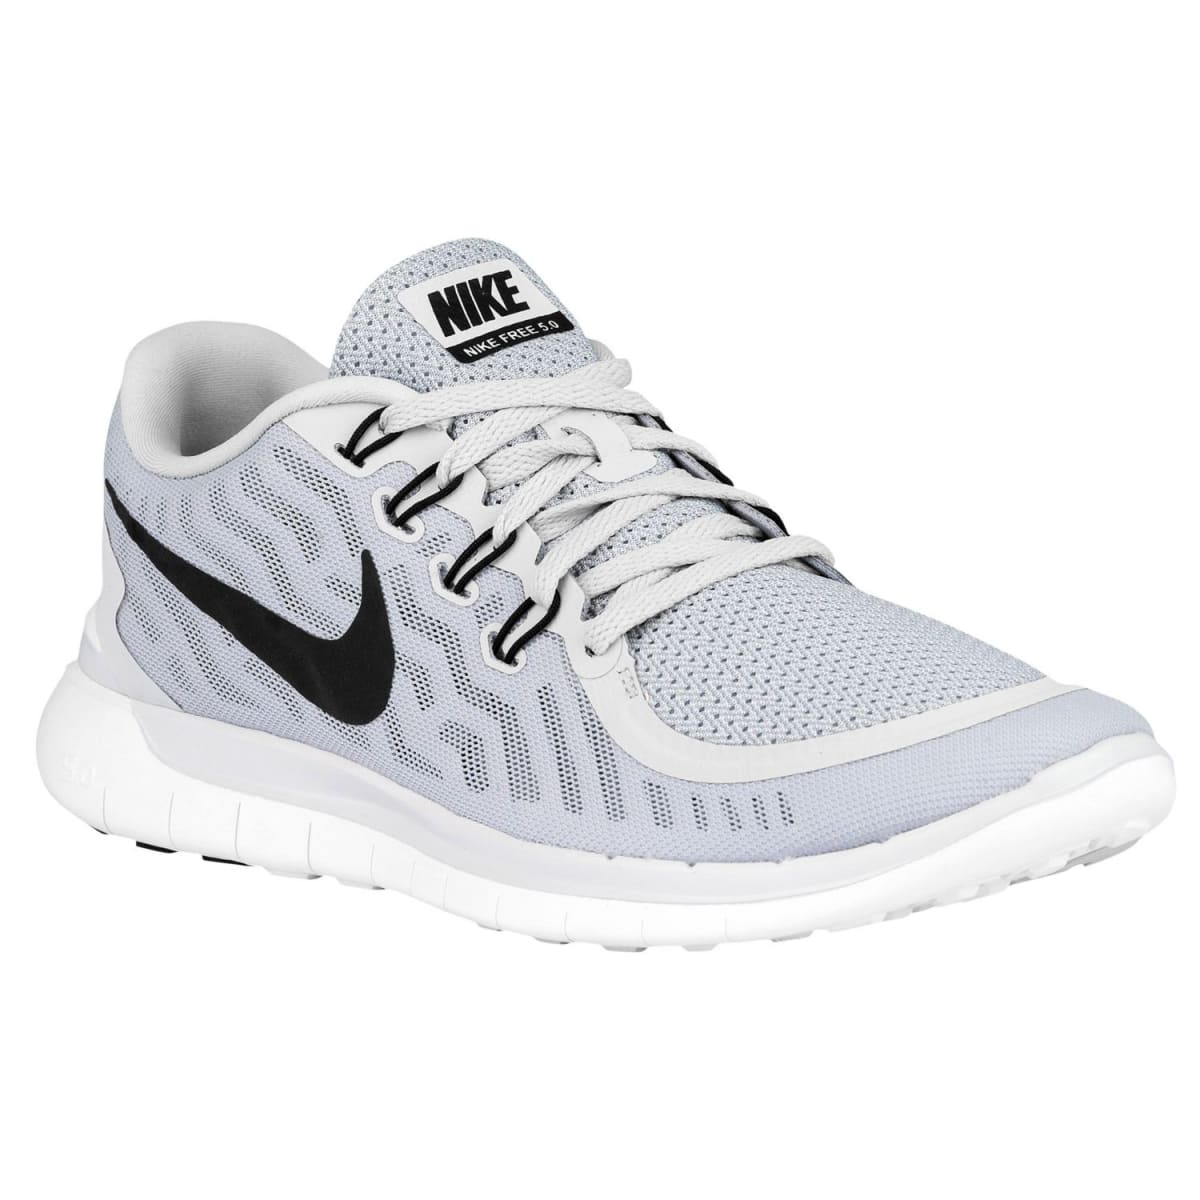 Nike Free 5.0 2015 | Nike | Sneaker News, Launches, Release Dates, Collabs Info